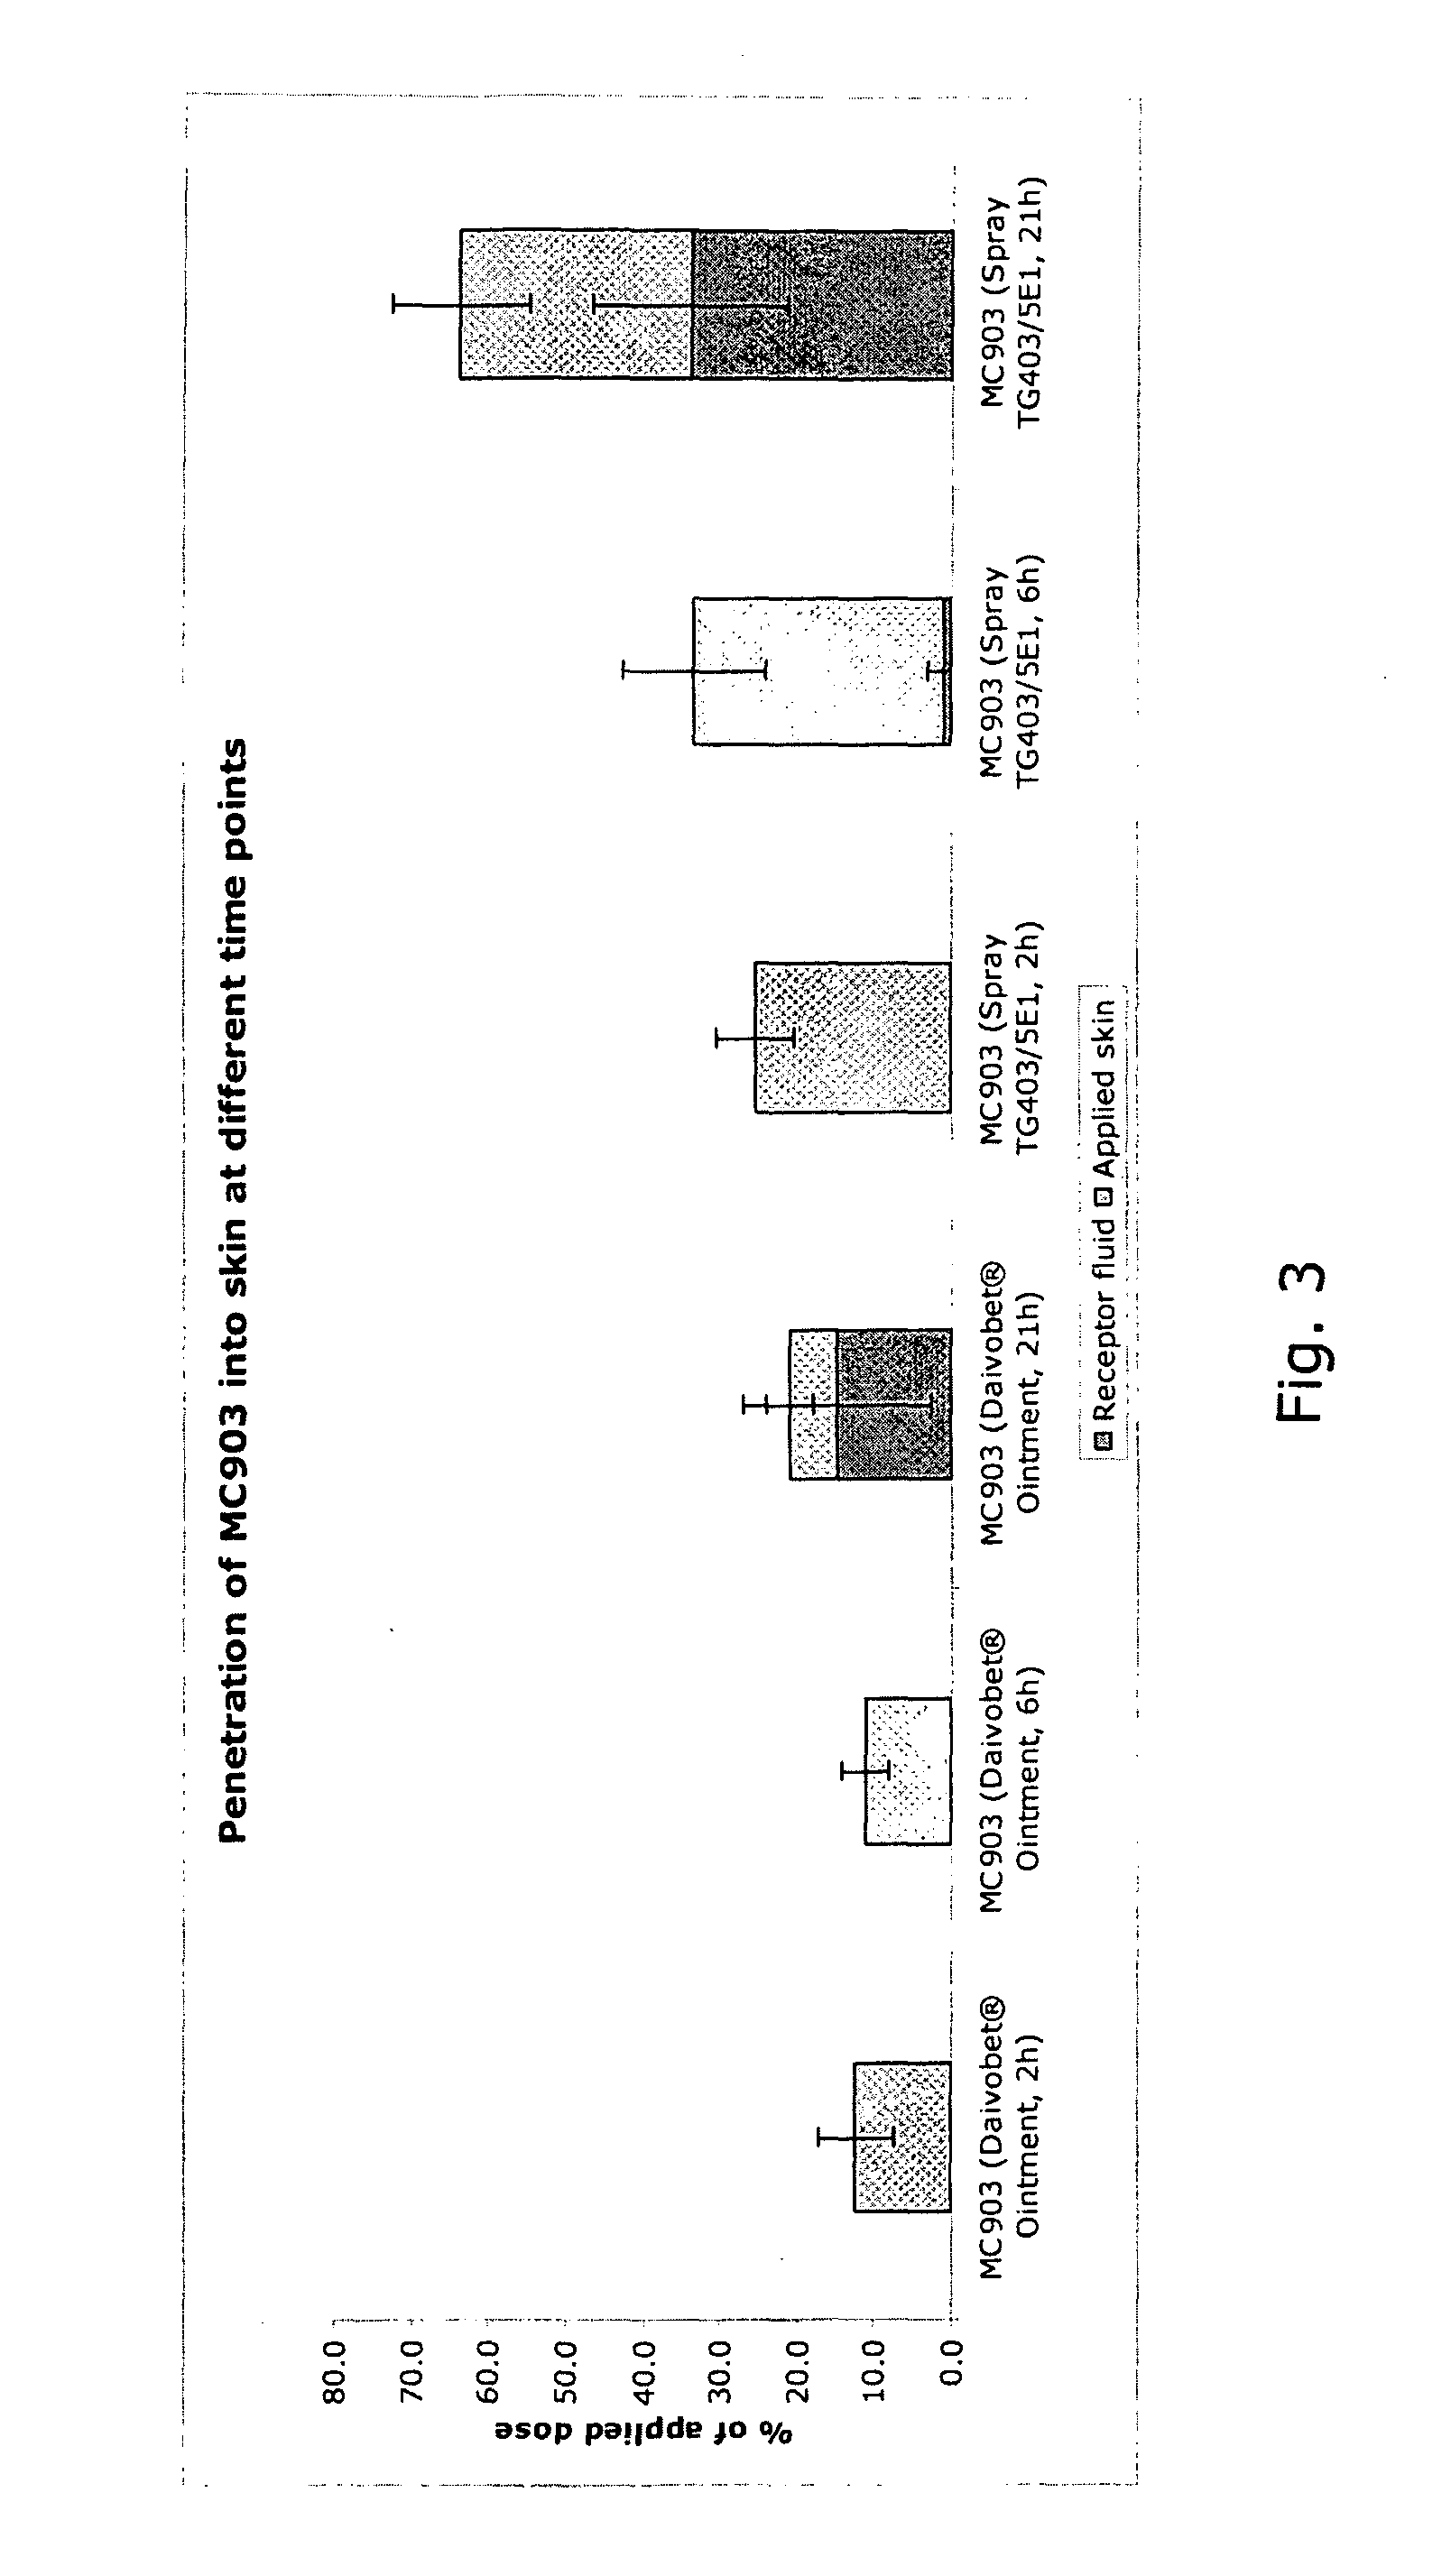 Pharmaceutical spray composition comprising a vitamin d analogue and a corticosteroid